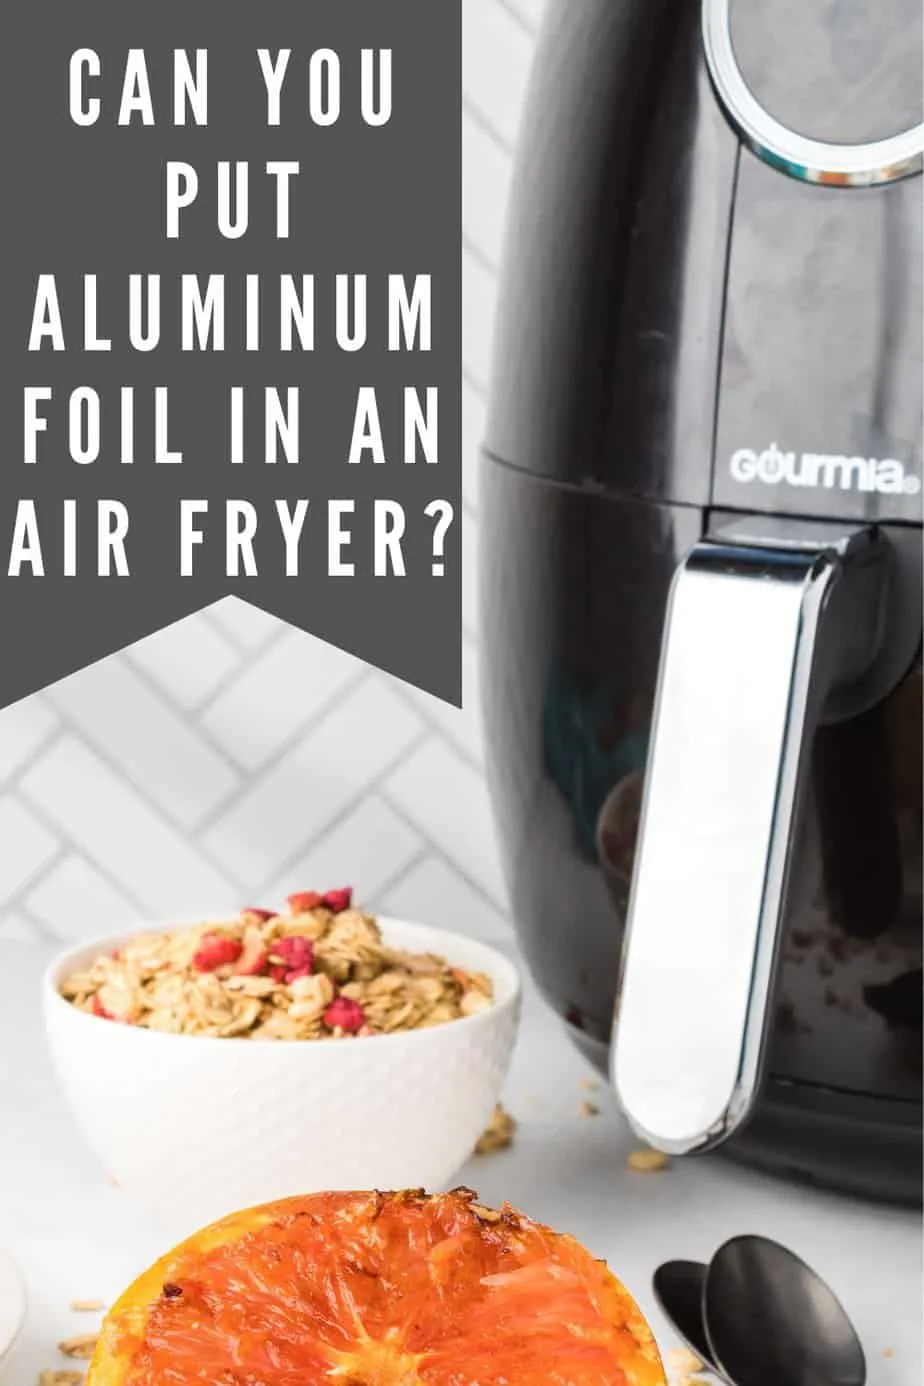 ALL about USING FOIL in the #AirFryer